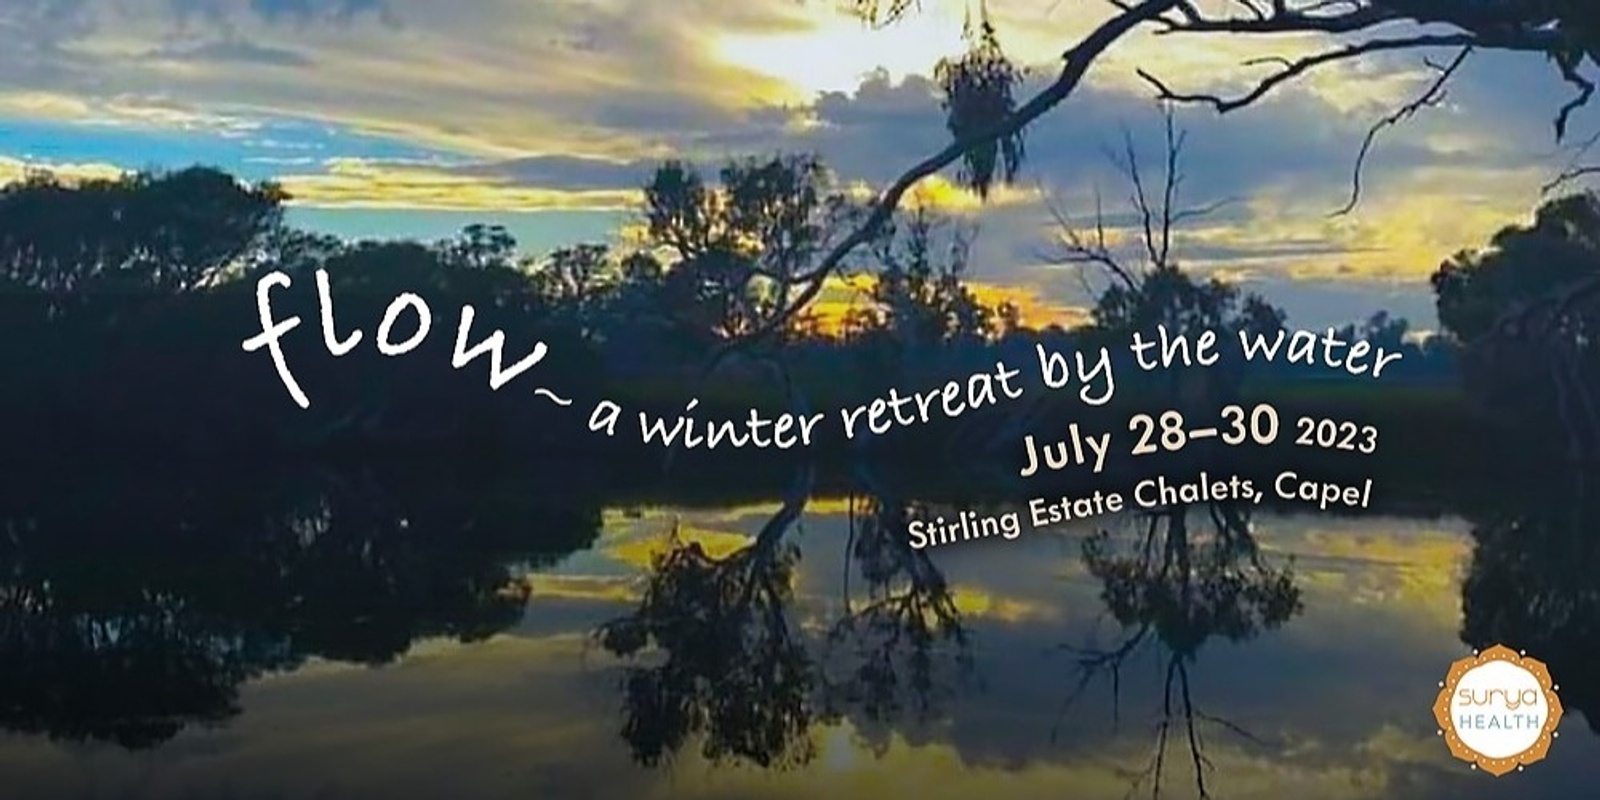 Banner image for Flow: A Winter Retreat by the Water